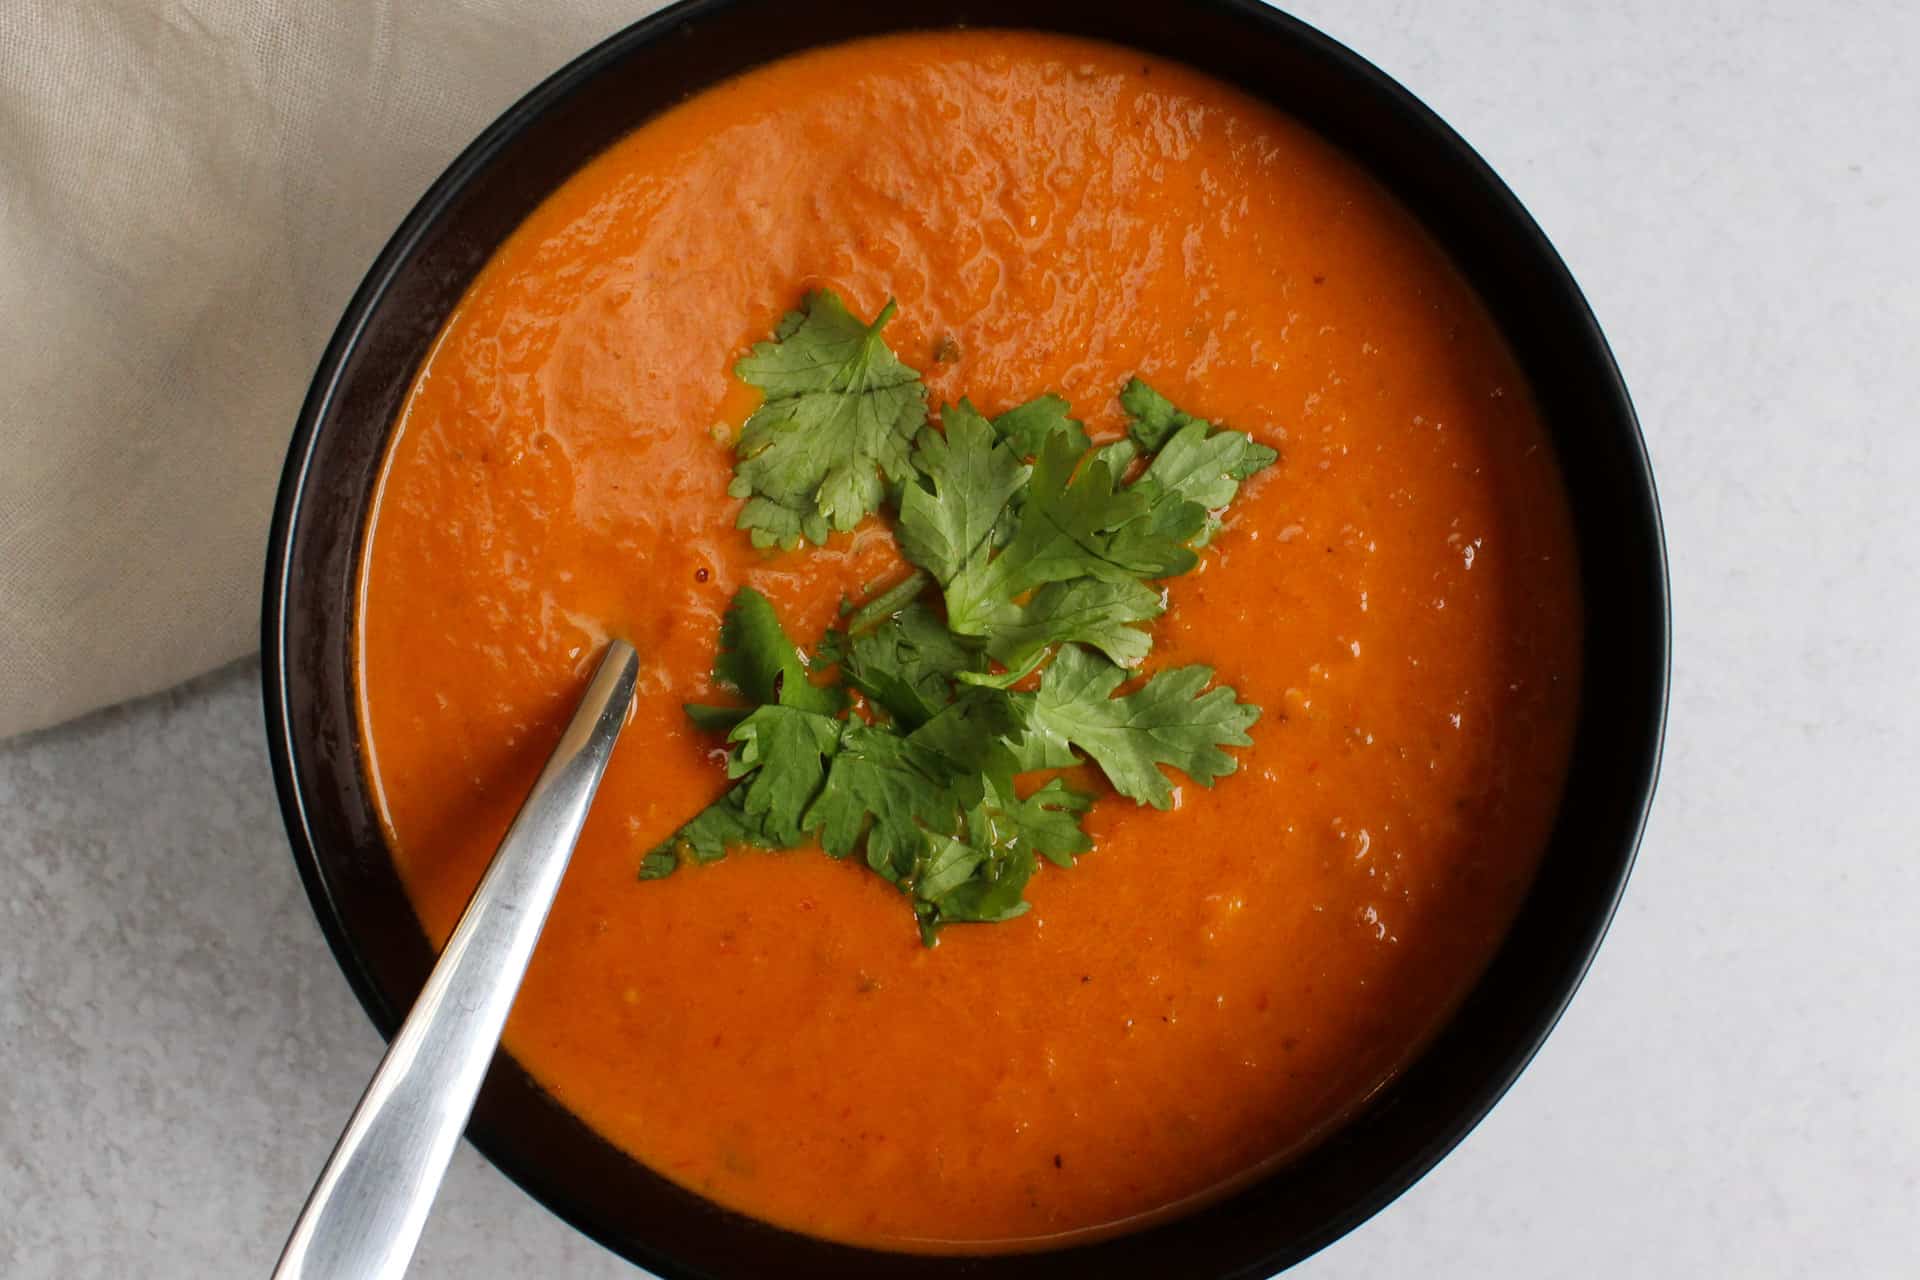 A bowl of spicy Indian tomato soup garnished with cilantro.